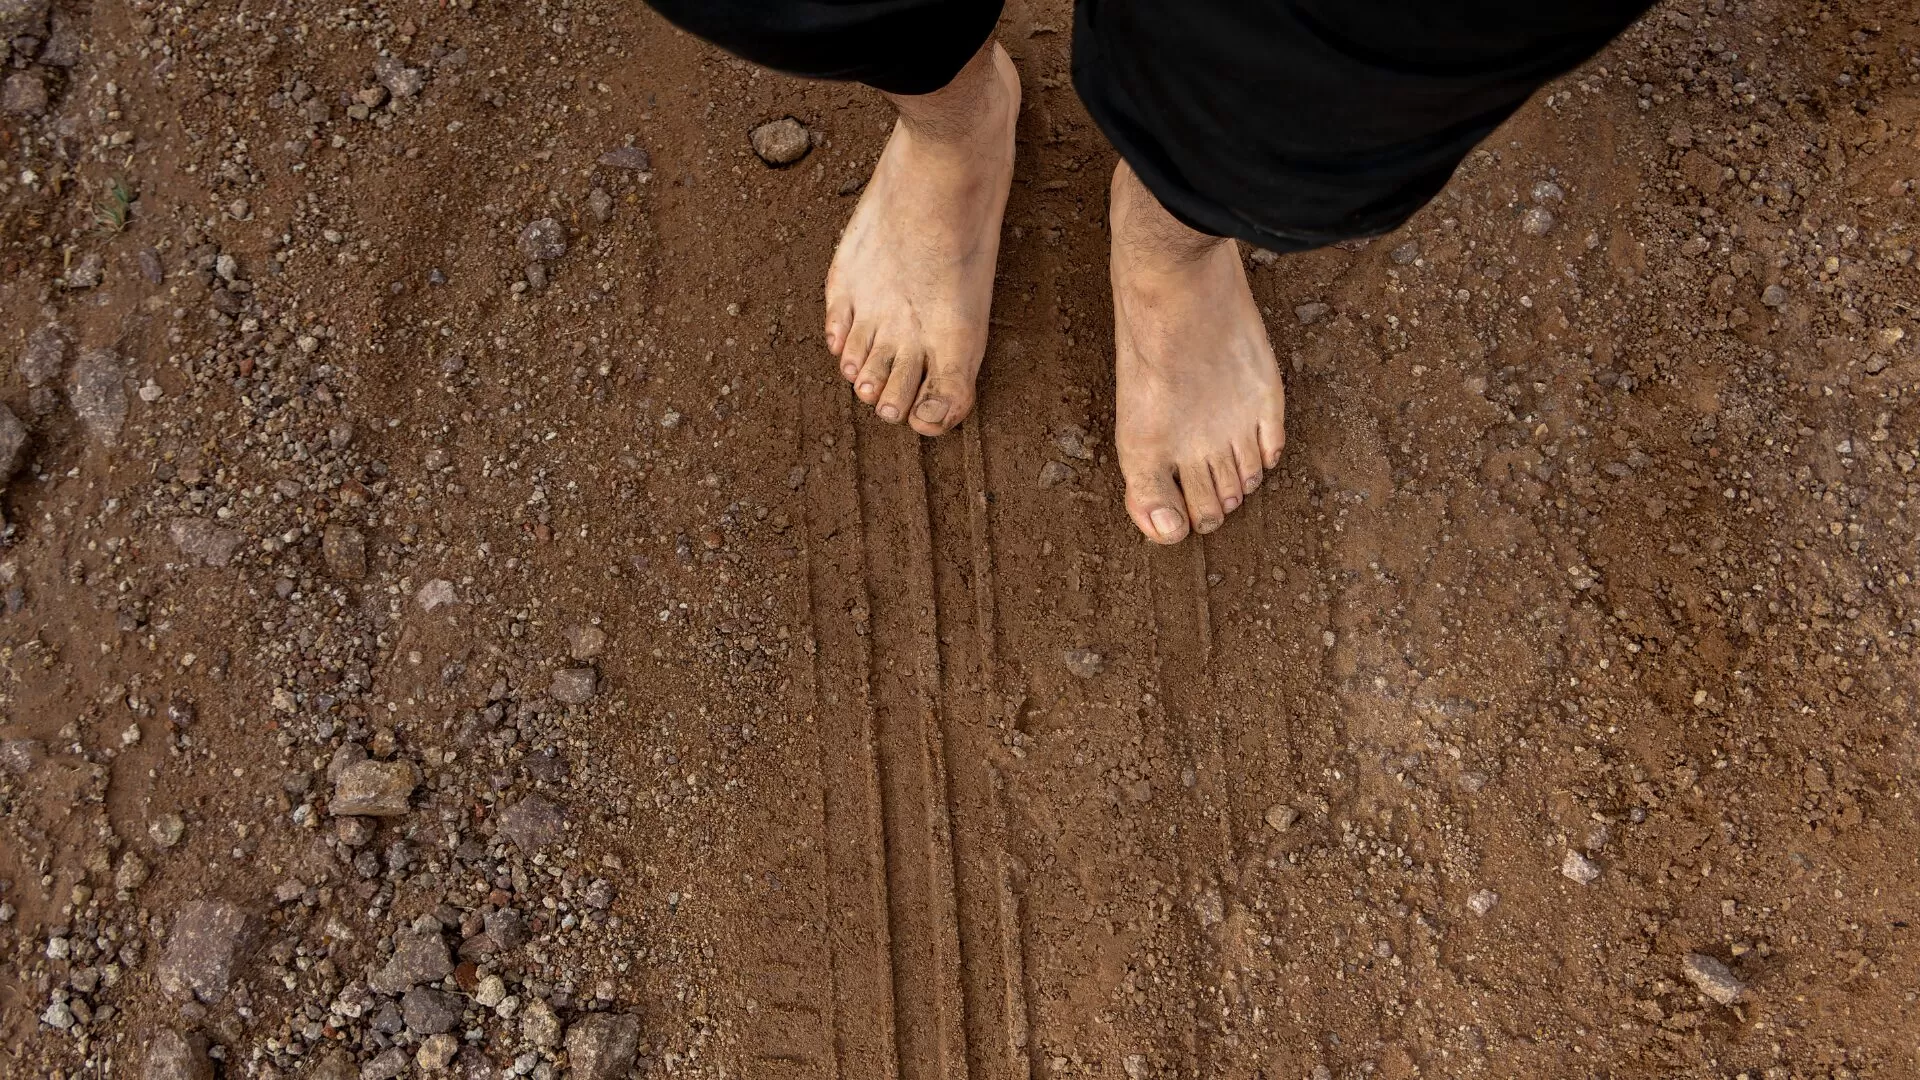 Grounding has Scientifically Proven Results – Is Being Barefoot Free Medicine?